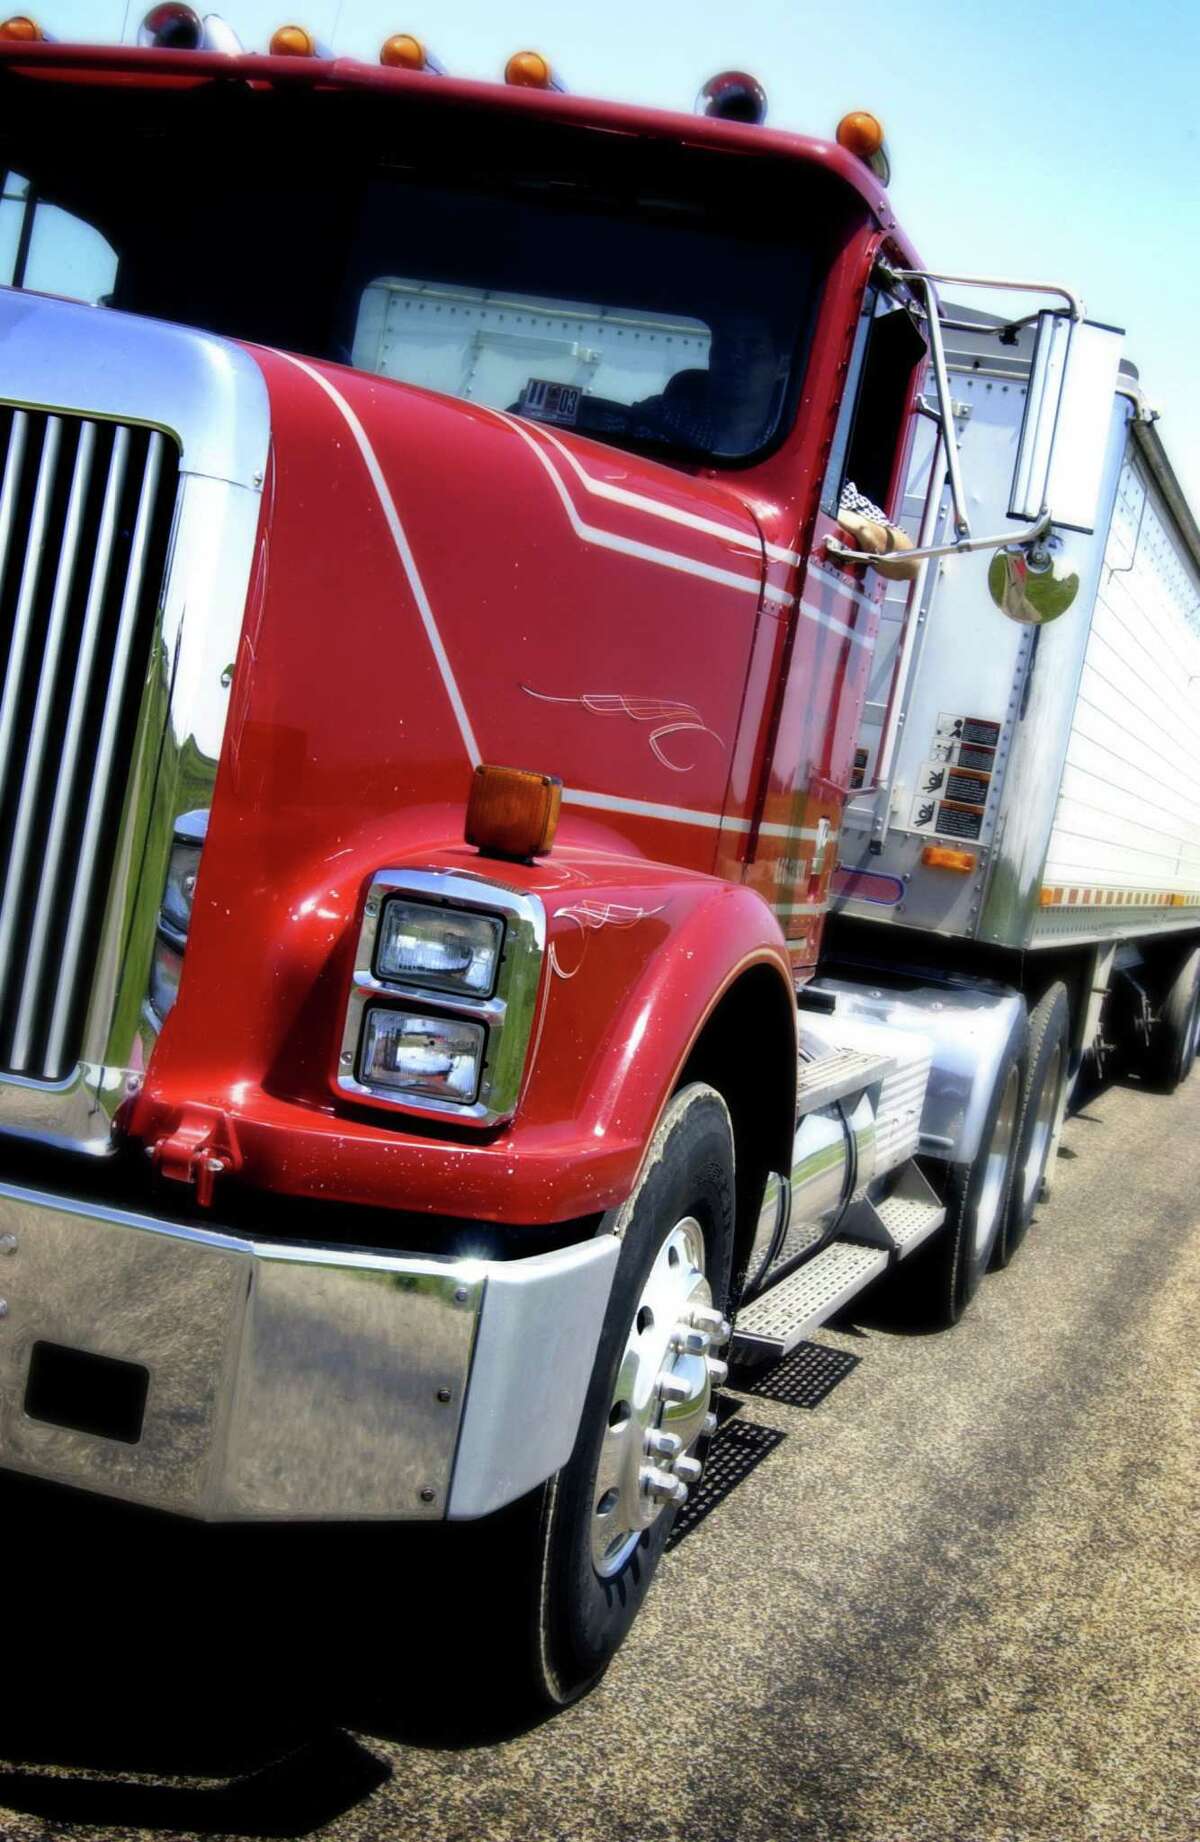 Gov. Ned Lamont is proposing a new tax on the heaviest trucks that drive through Connecticut, in a plan aimed at raising $90 million a year.